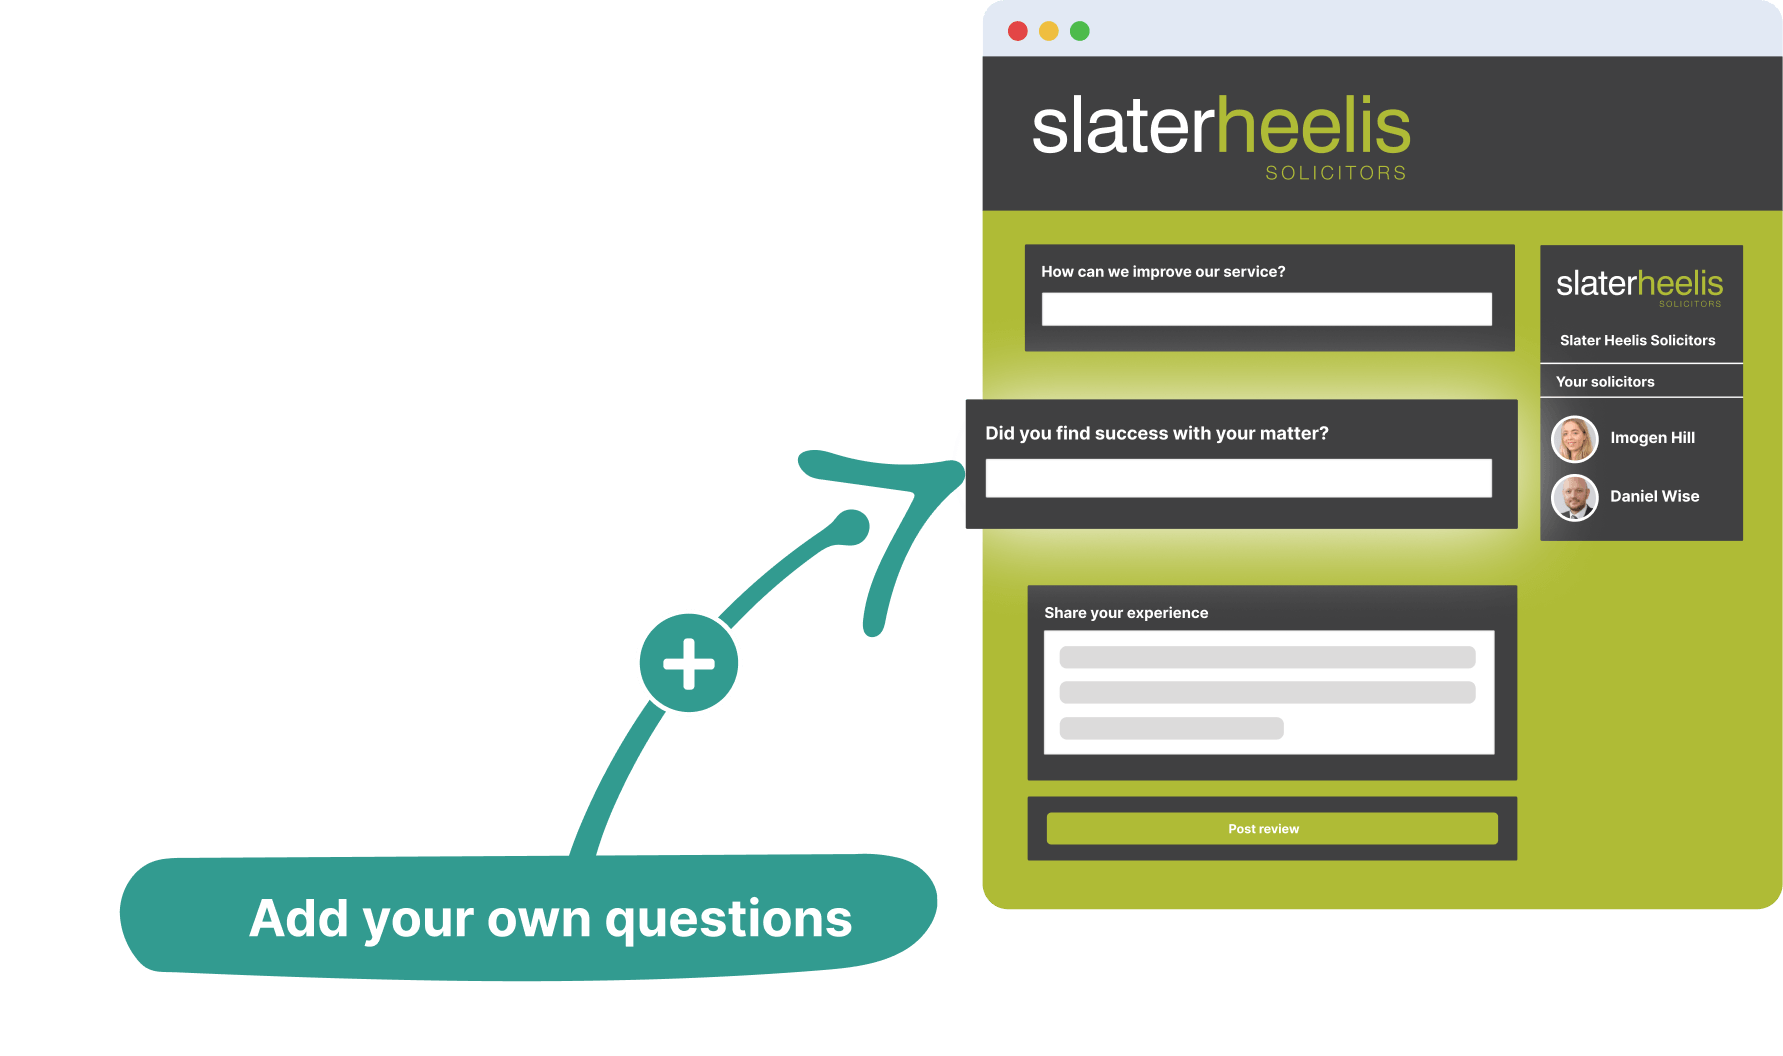 Custom questionnaire - add your own questions